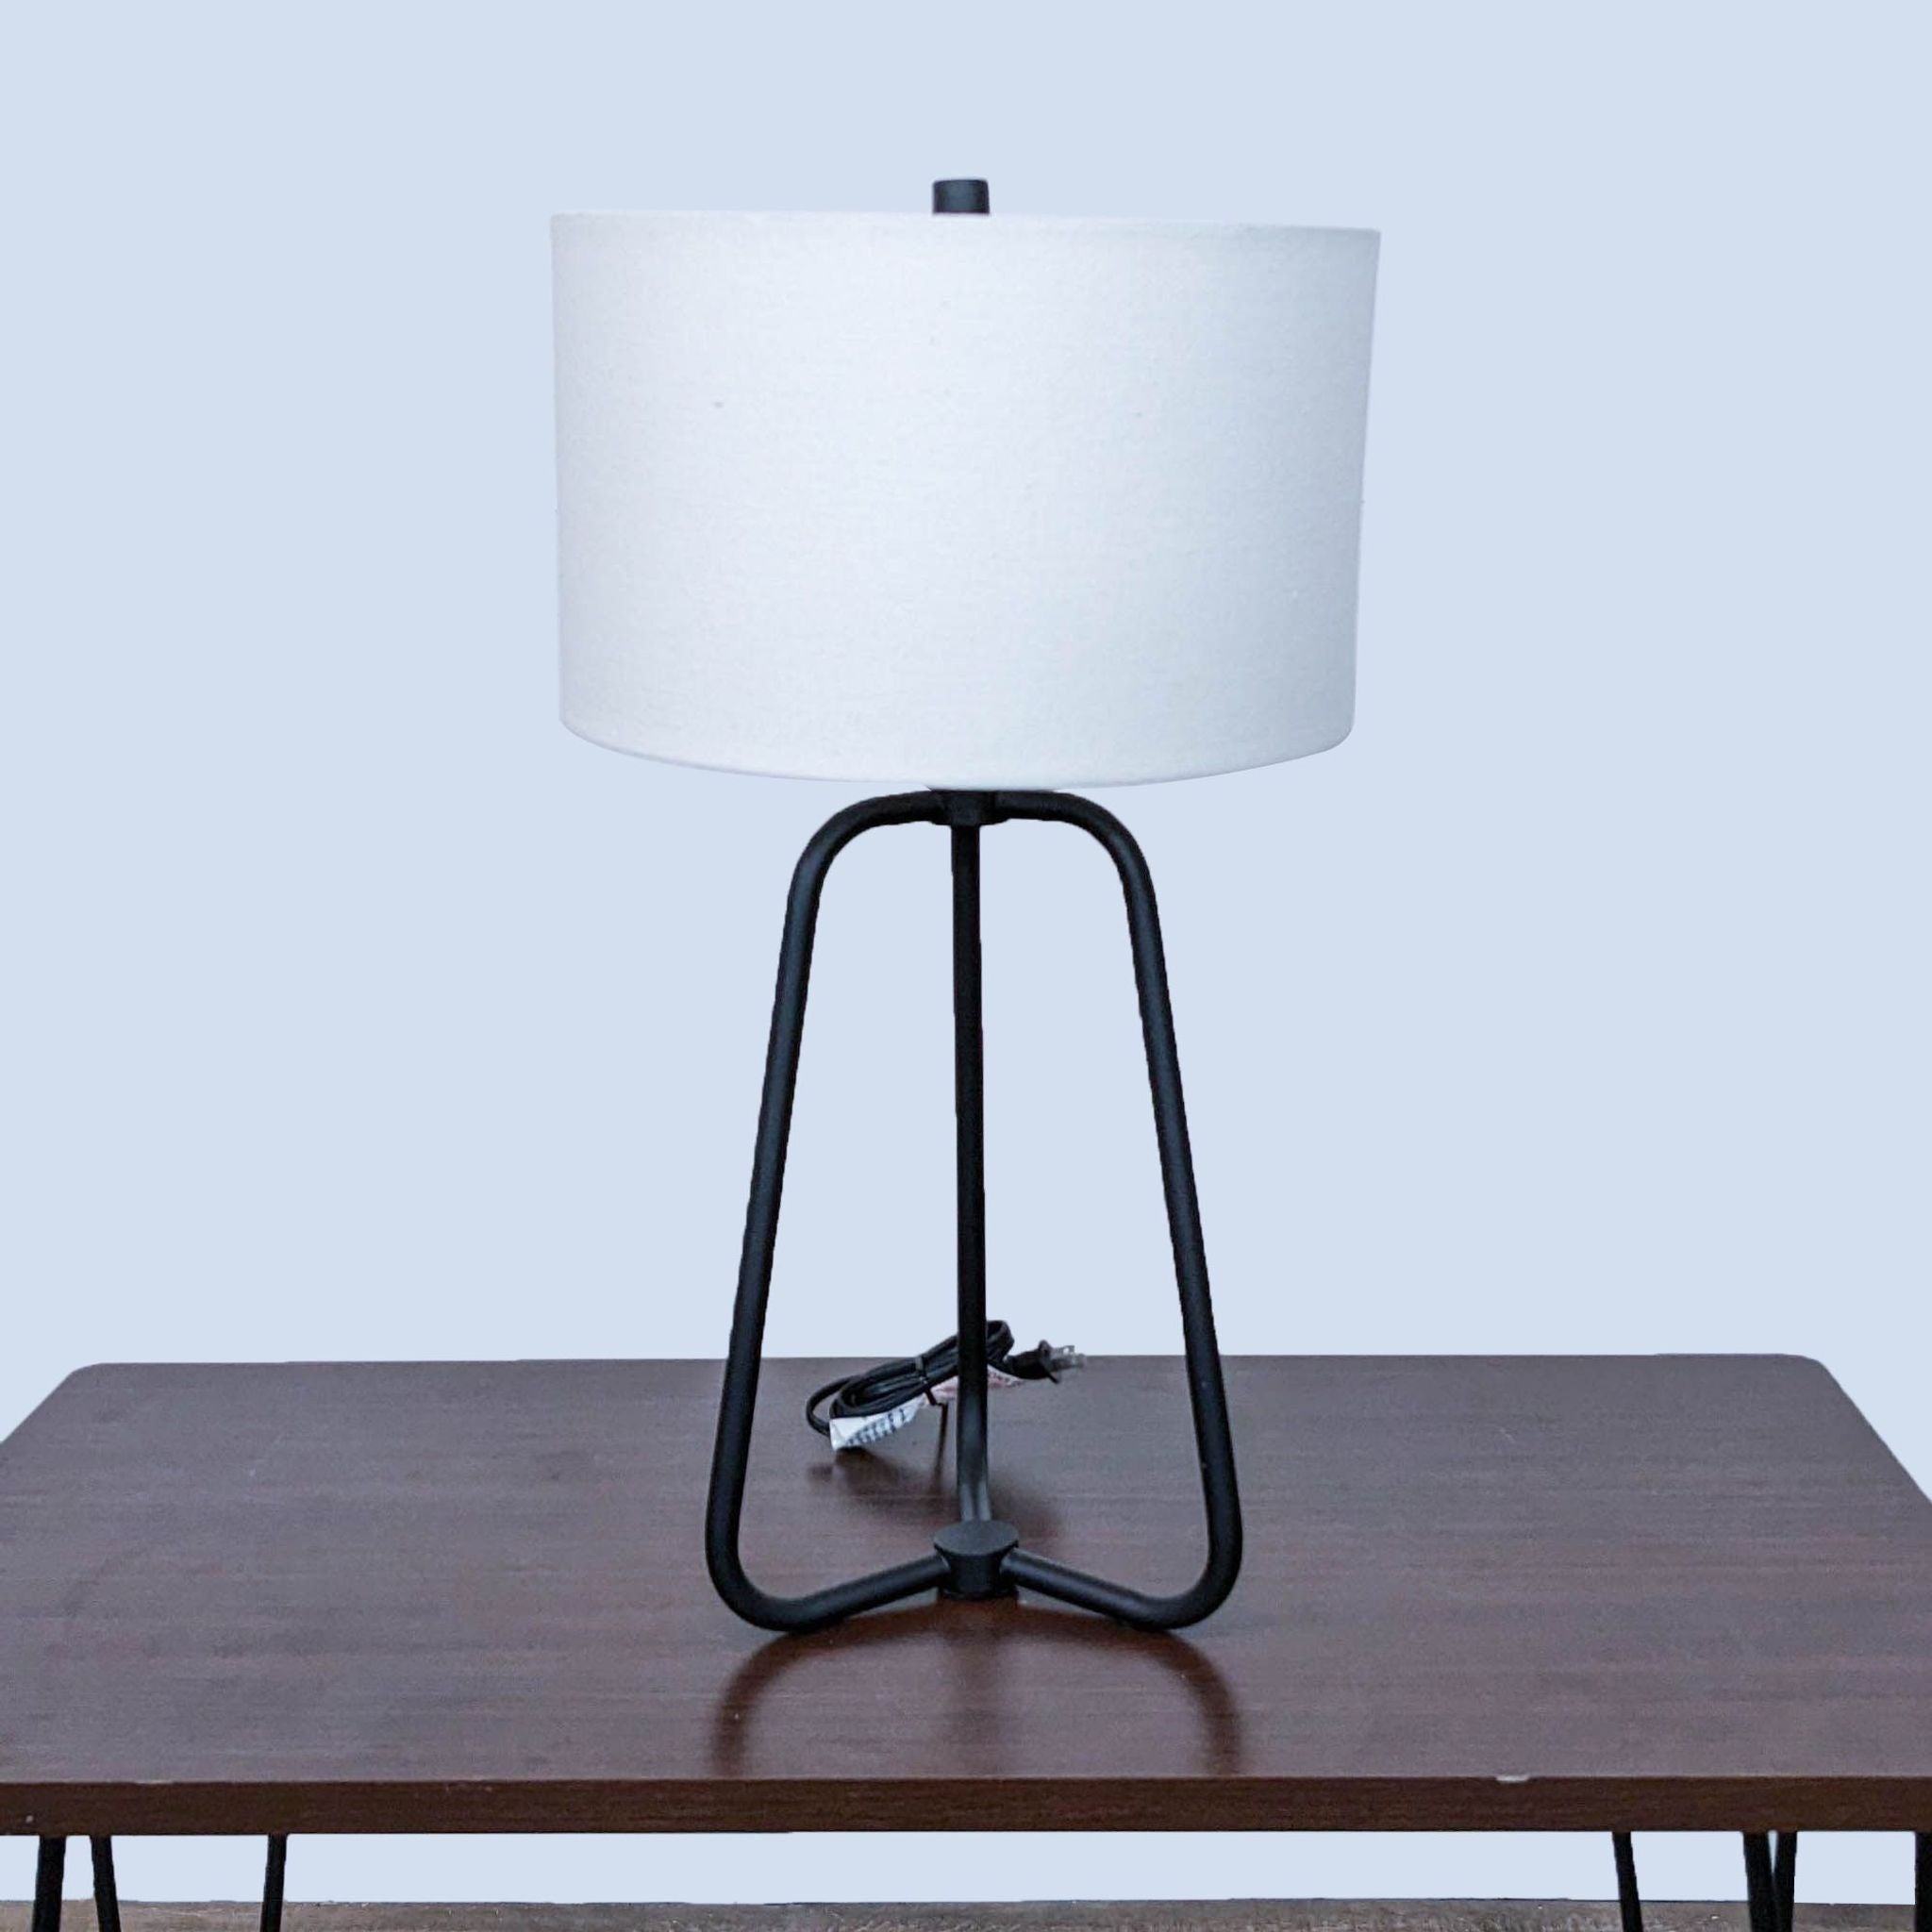 Front-facing view of a Reperch tripod table lamp with cylindrical white shade and black legs.